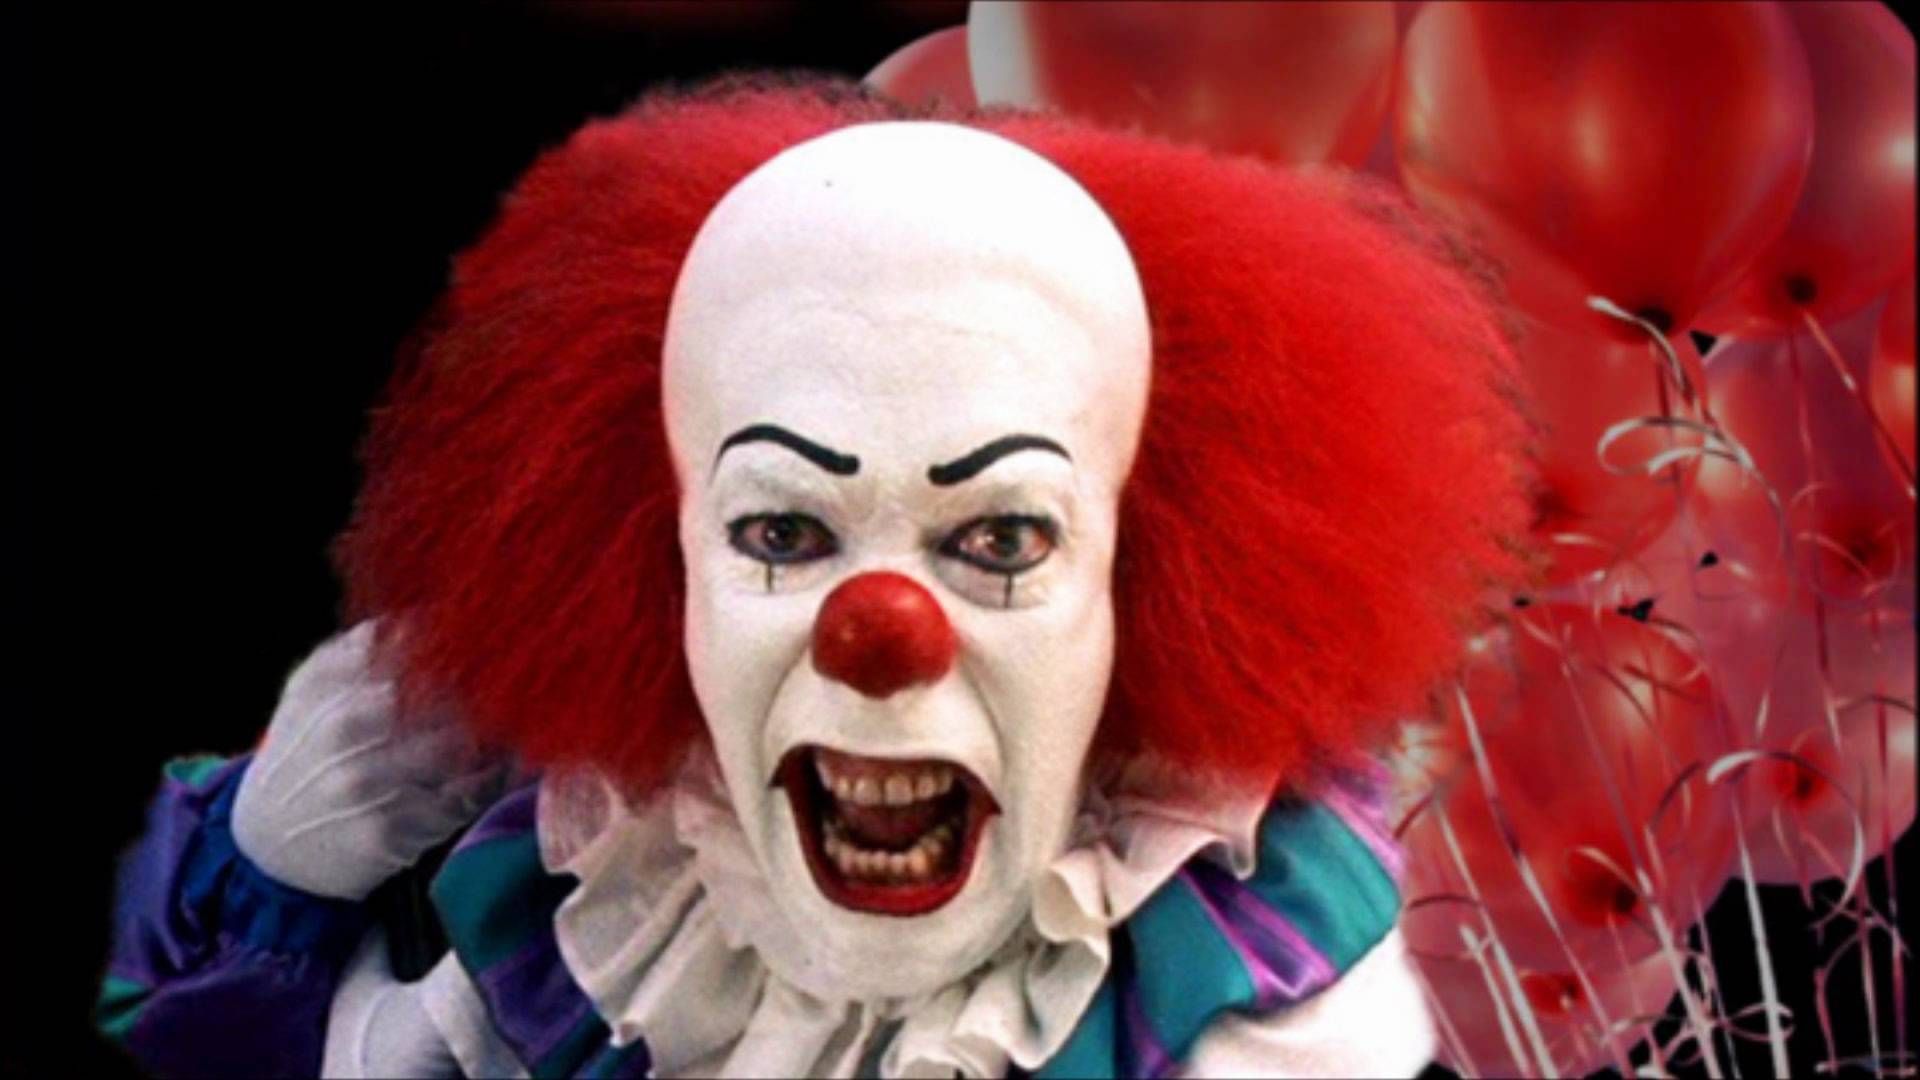 It The Clown Wallpaper. Pennywise the clown, Scary movies, Stephen king books